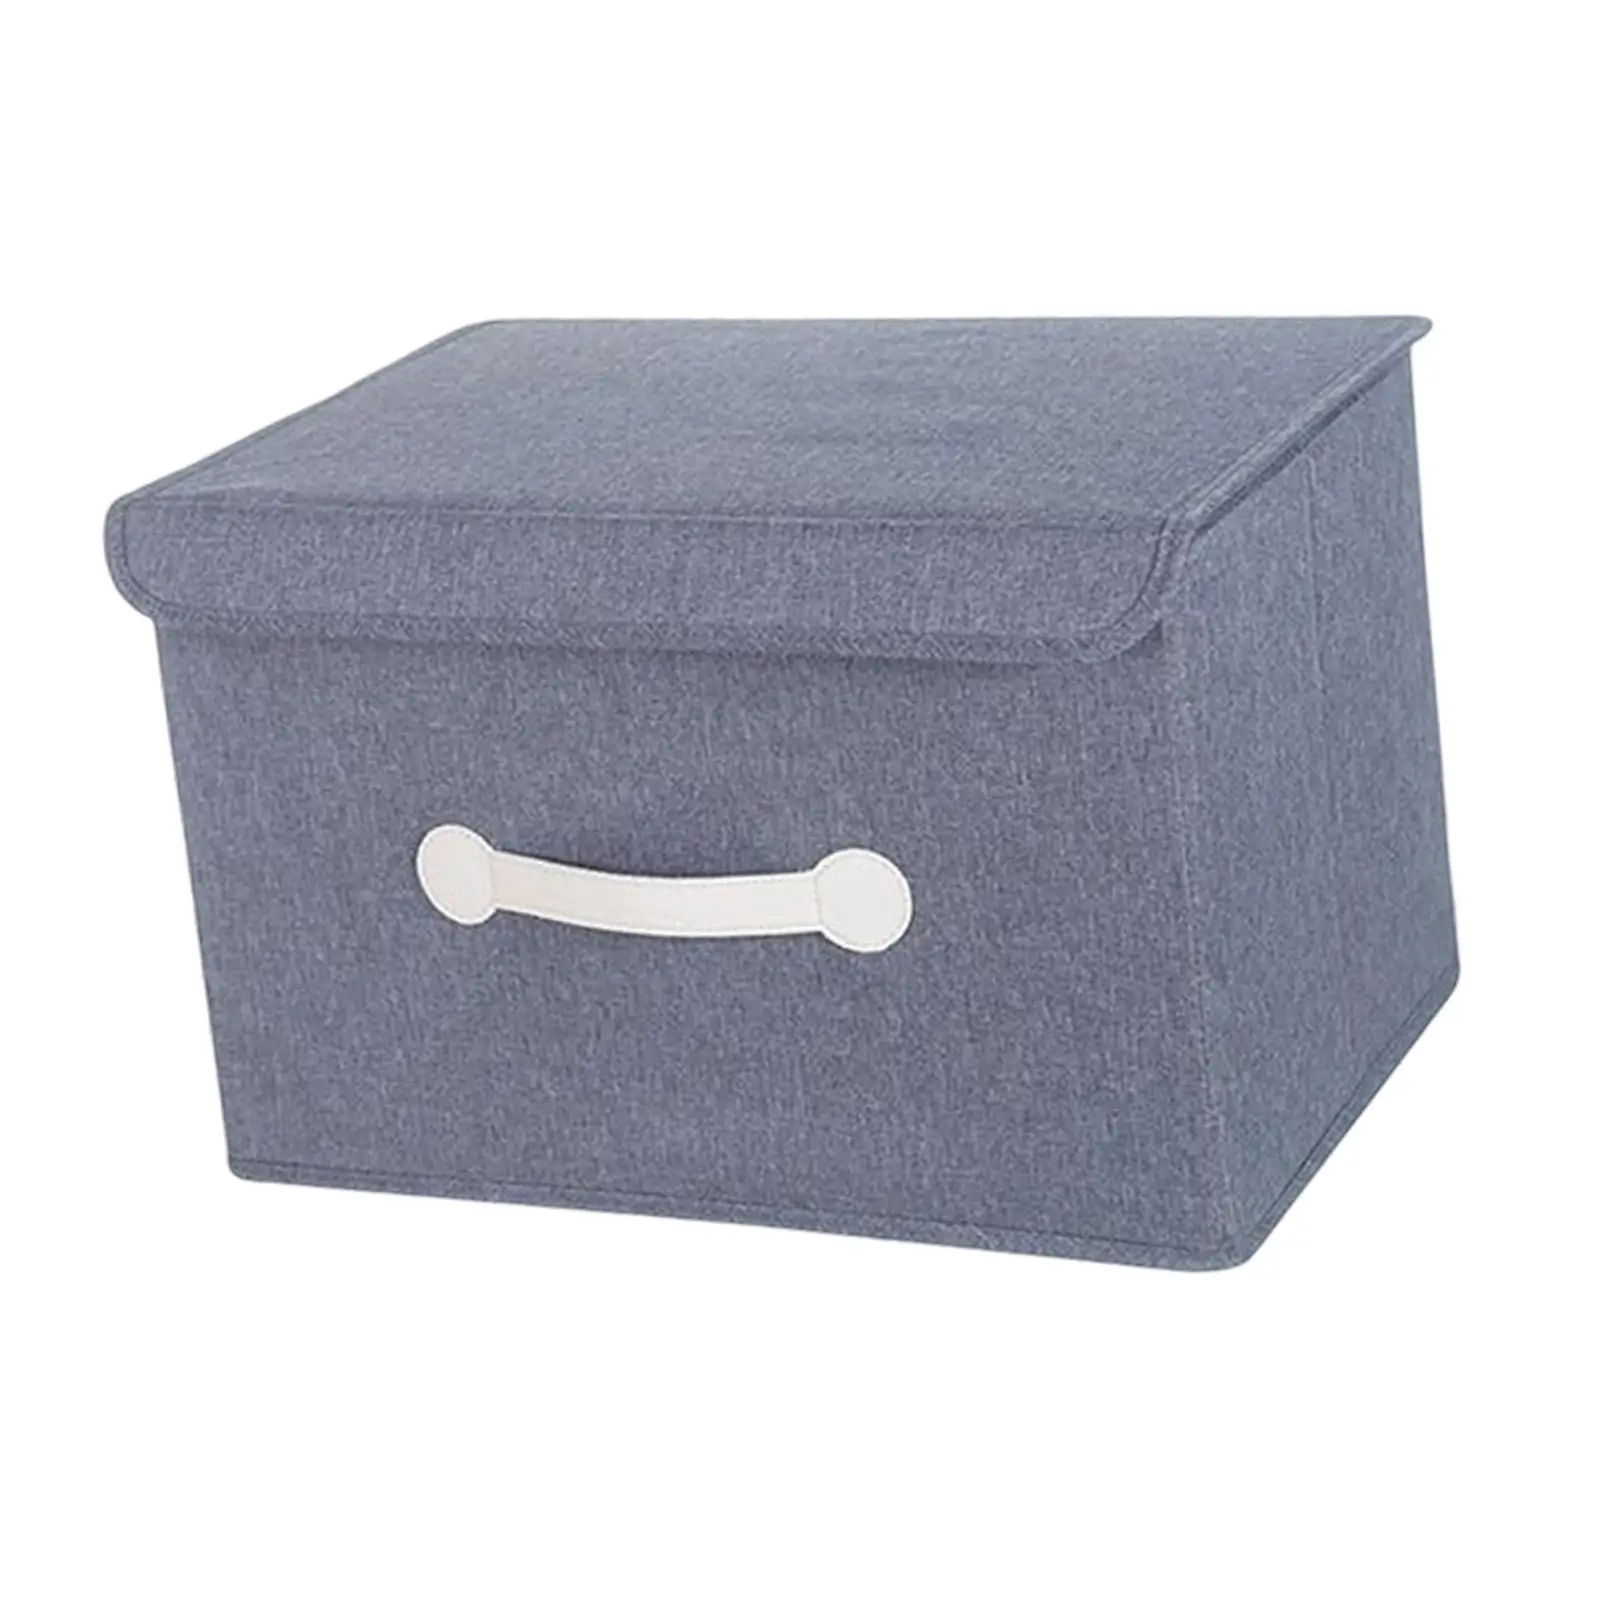 Fabric Clothes Storage Bag Closet Organizers Large Capacity Storage Box Foldable Storage Containers for dolls Clothes Shoes Toys